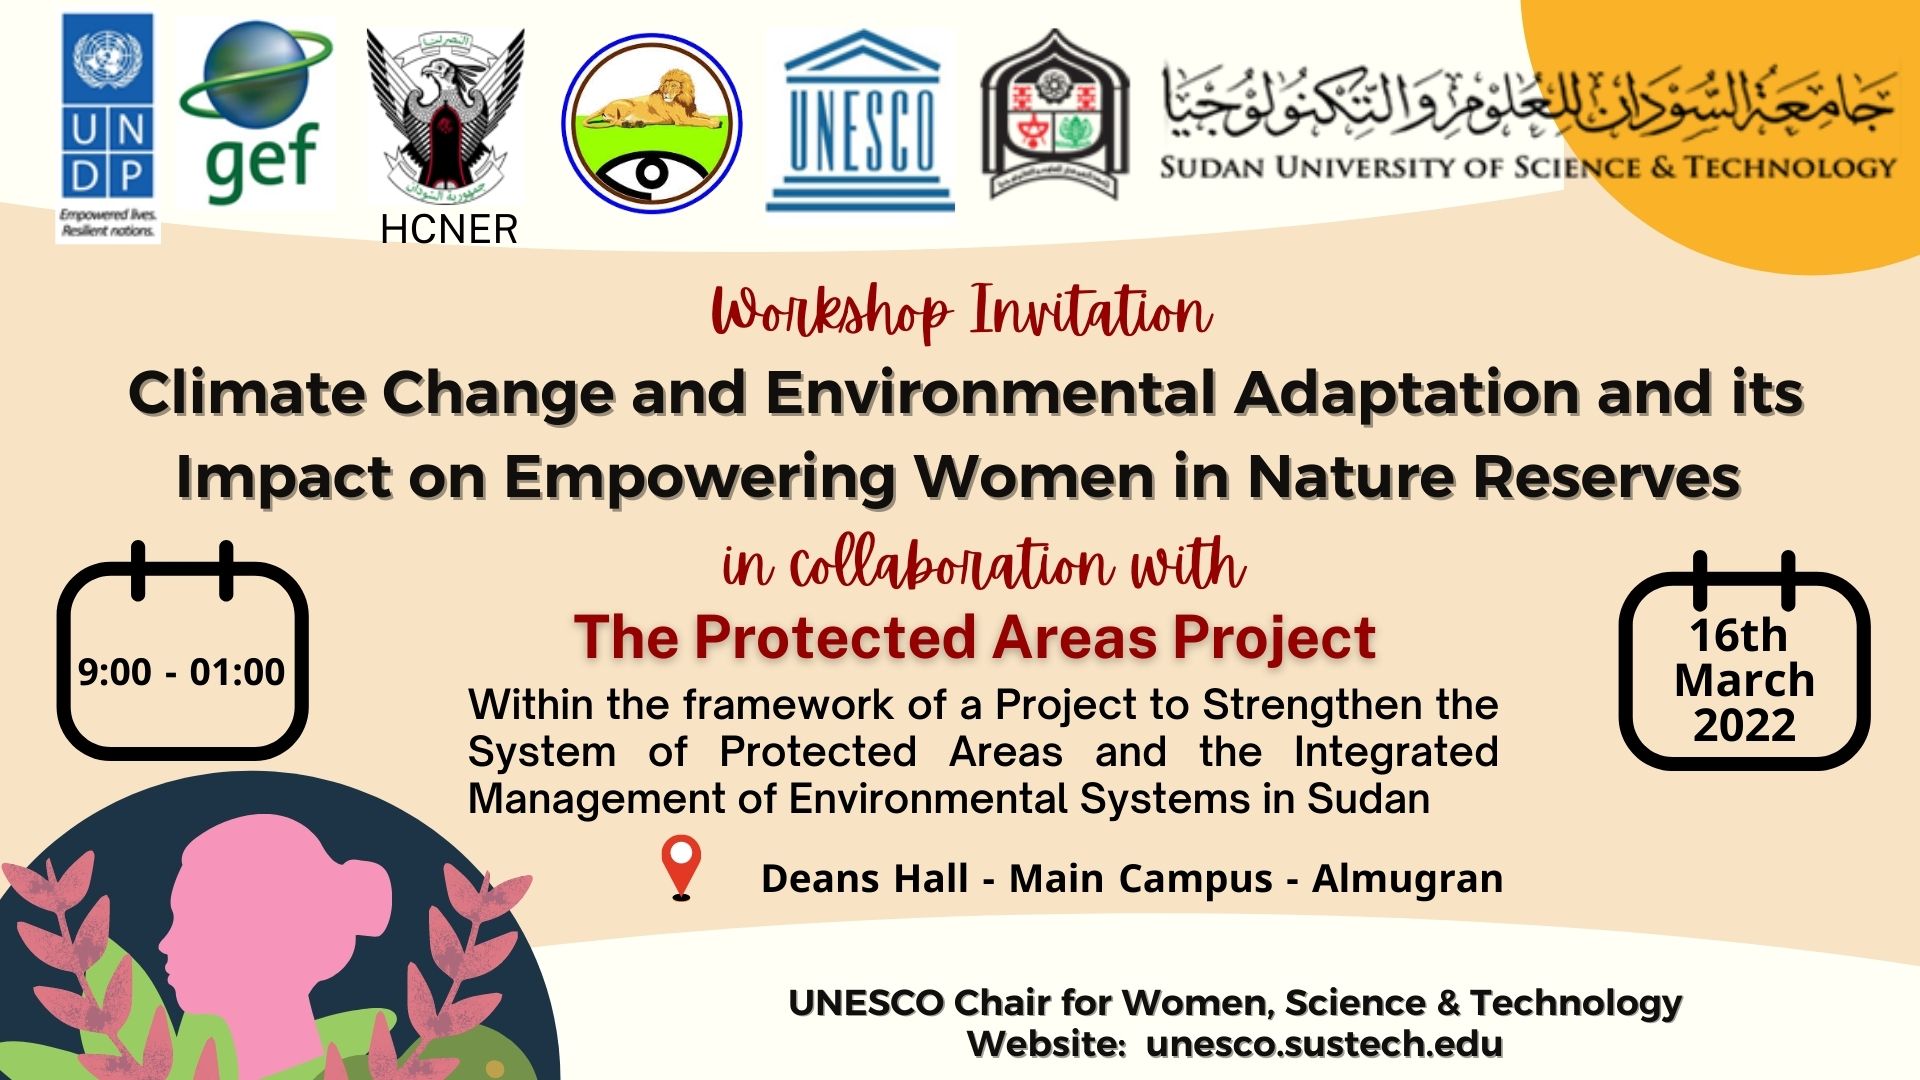 Workshop Invitation: Climate Change and its Impact on Women in Natural Reserves